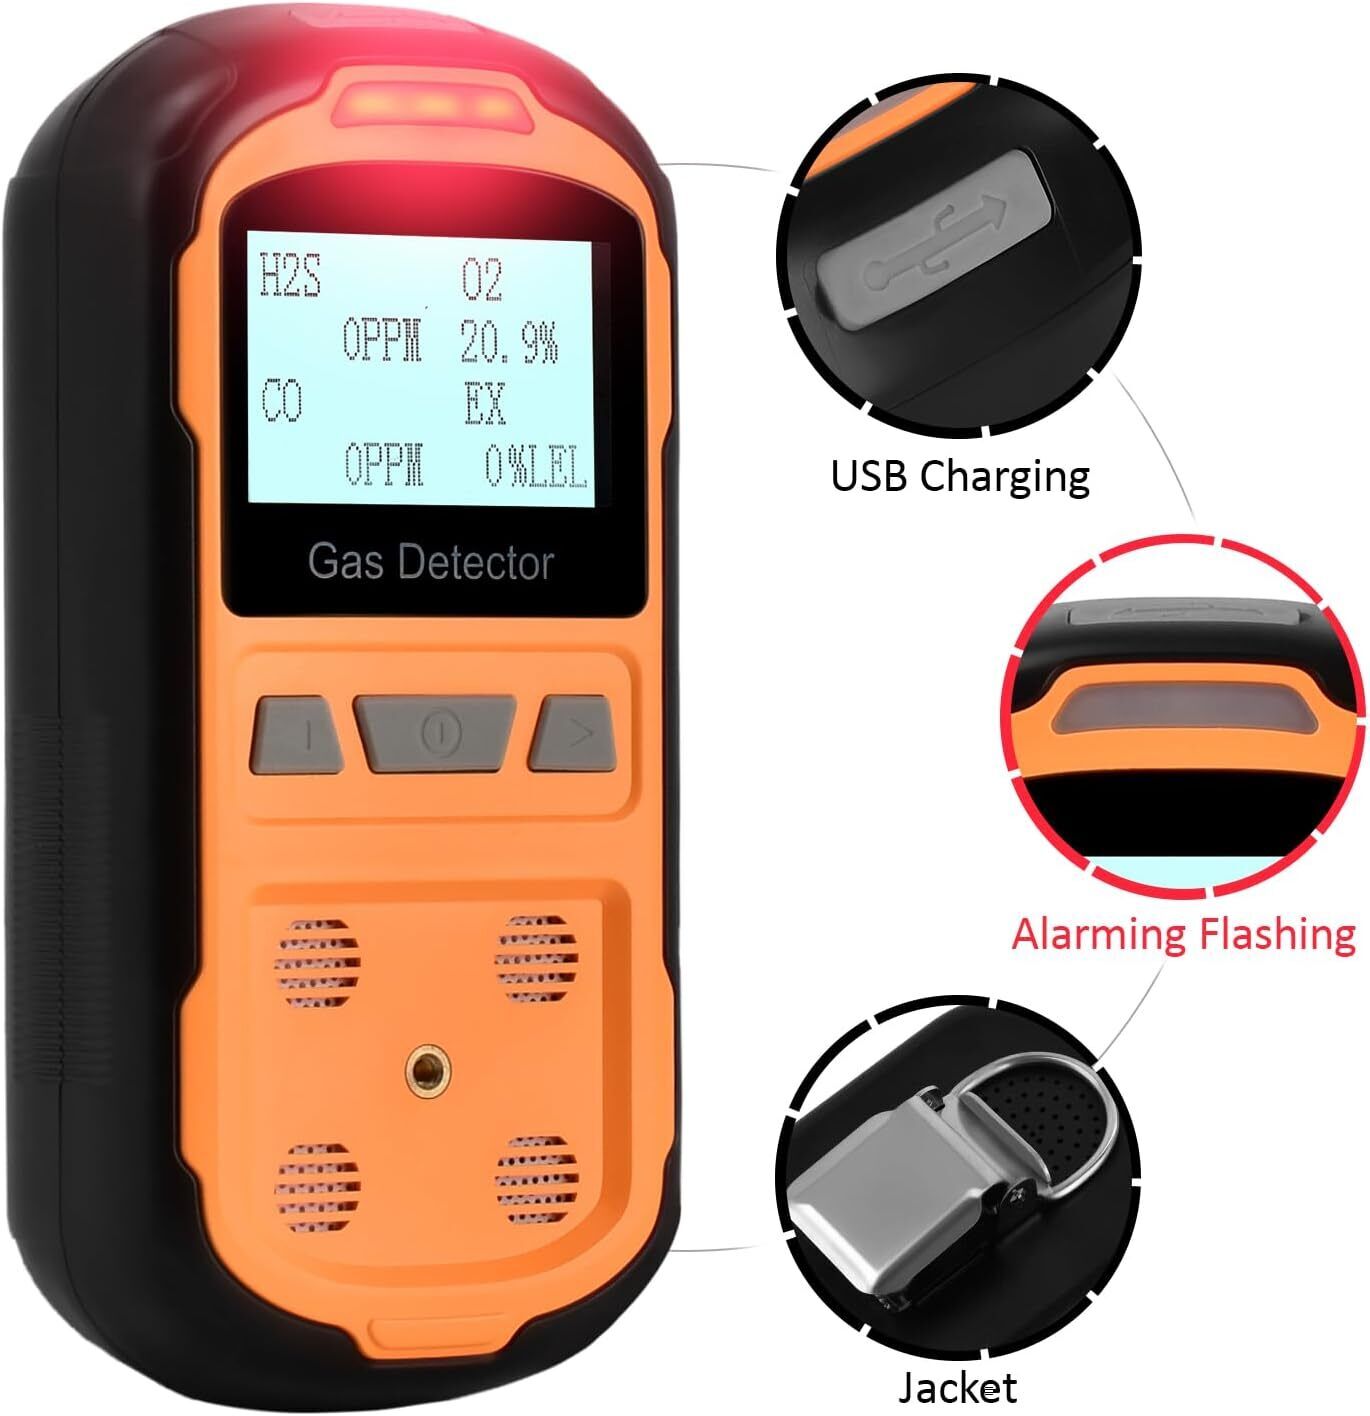 HZXVOGEN Portable Gas Detector 4IN1 H2S,O2,CO Gas Monitor Meter Tester Analyzer